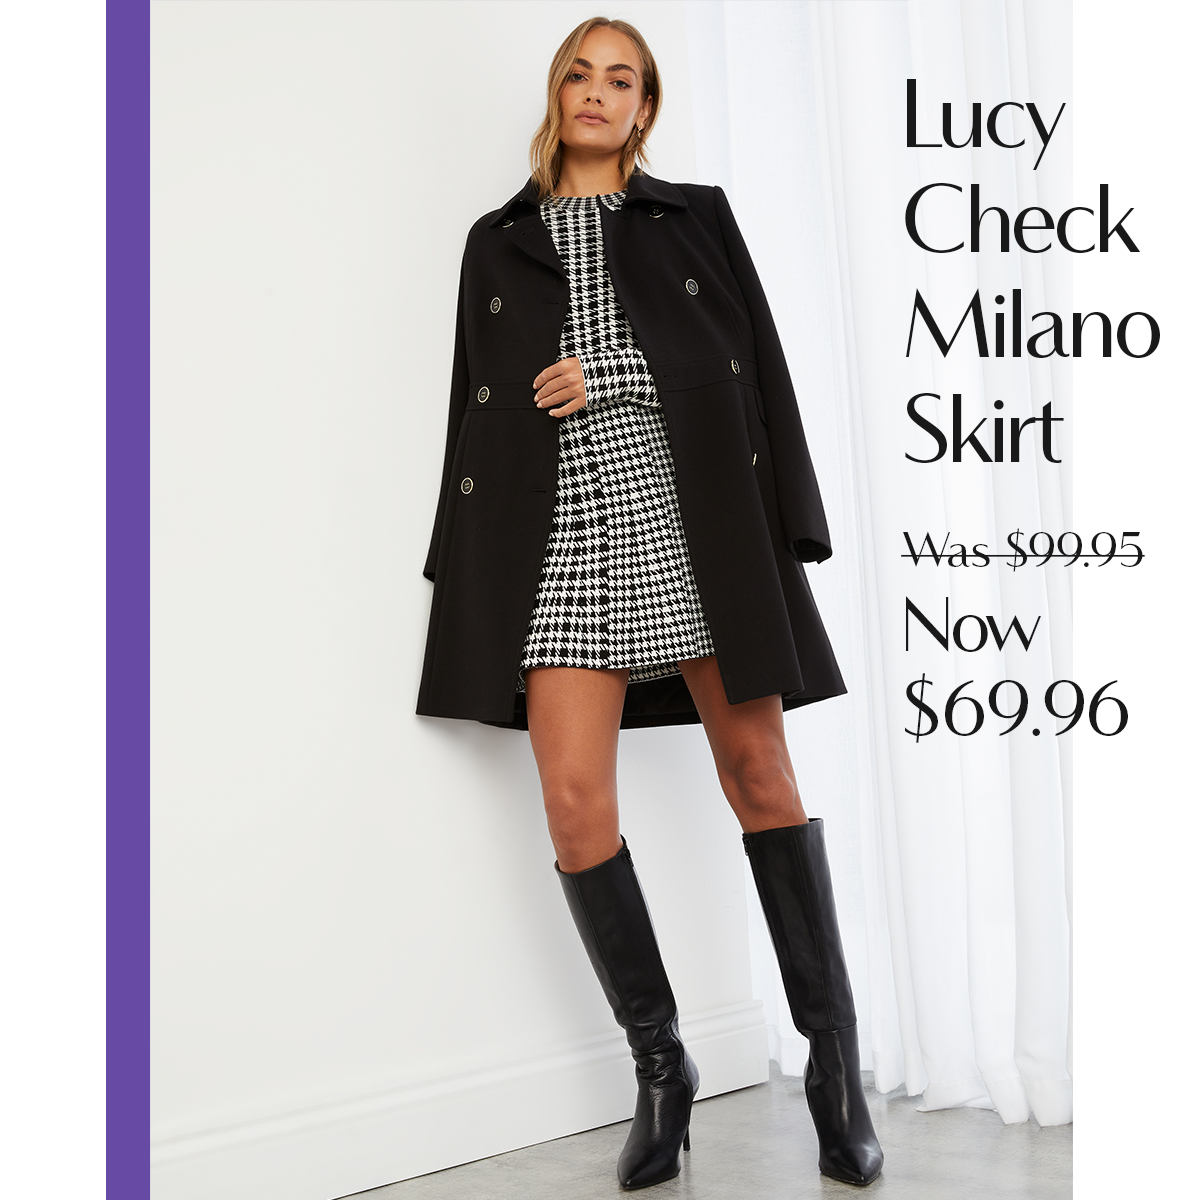 Lucy Check Milano Skirt Was $99.95 Now $69.96